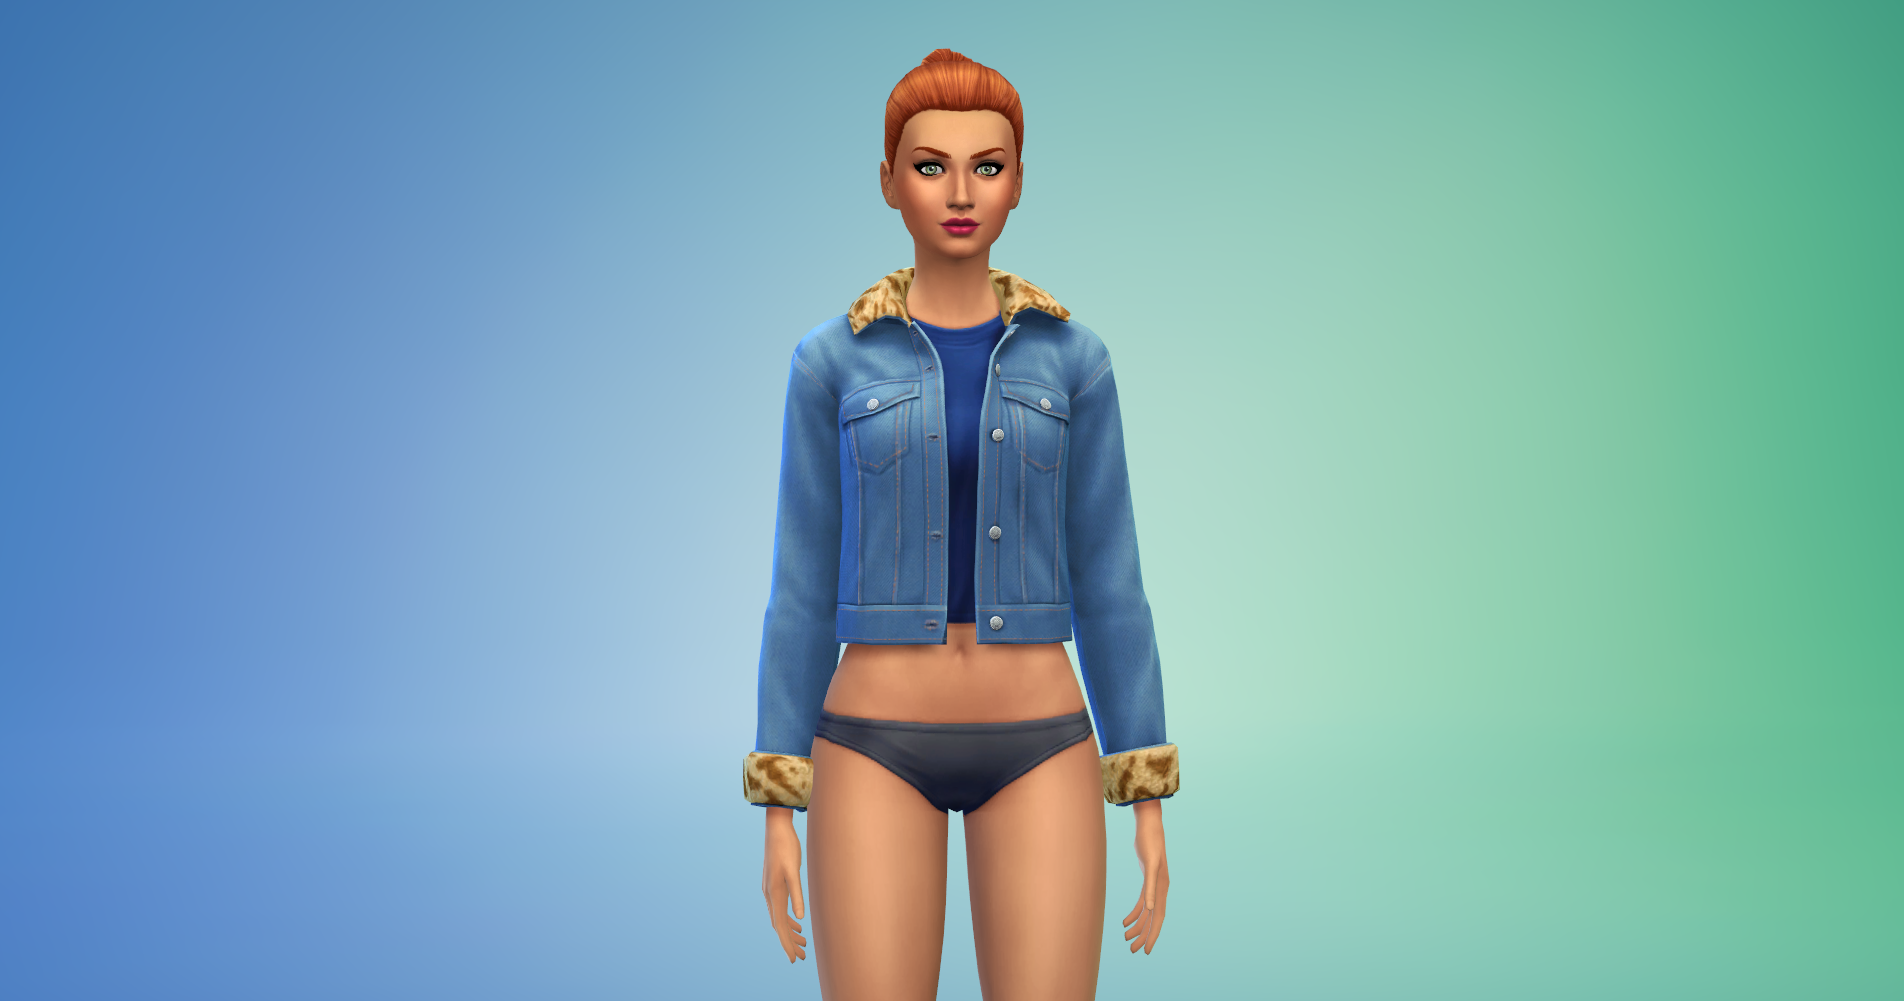 sims 4 base game careers